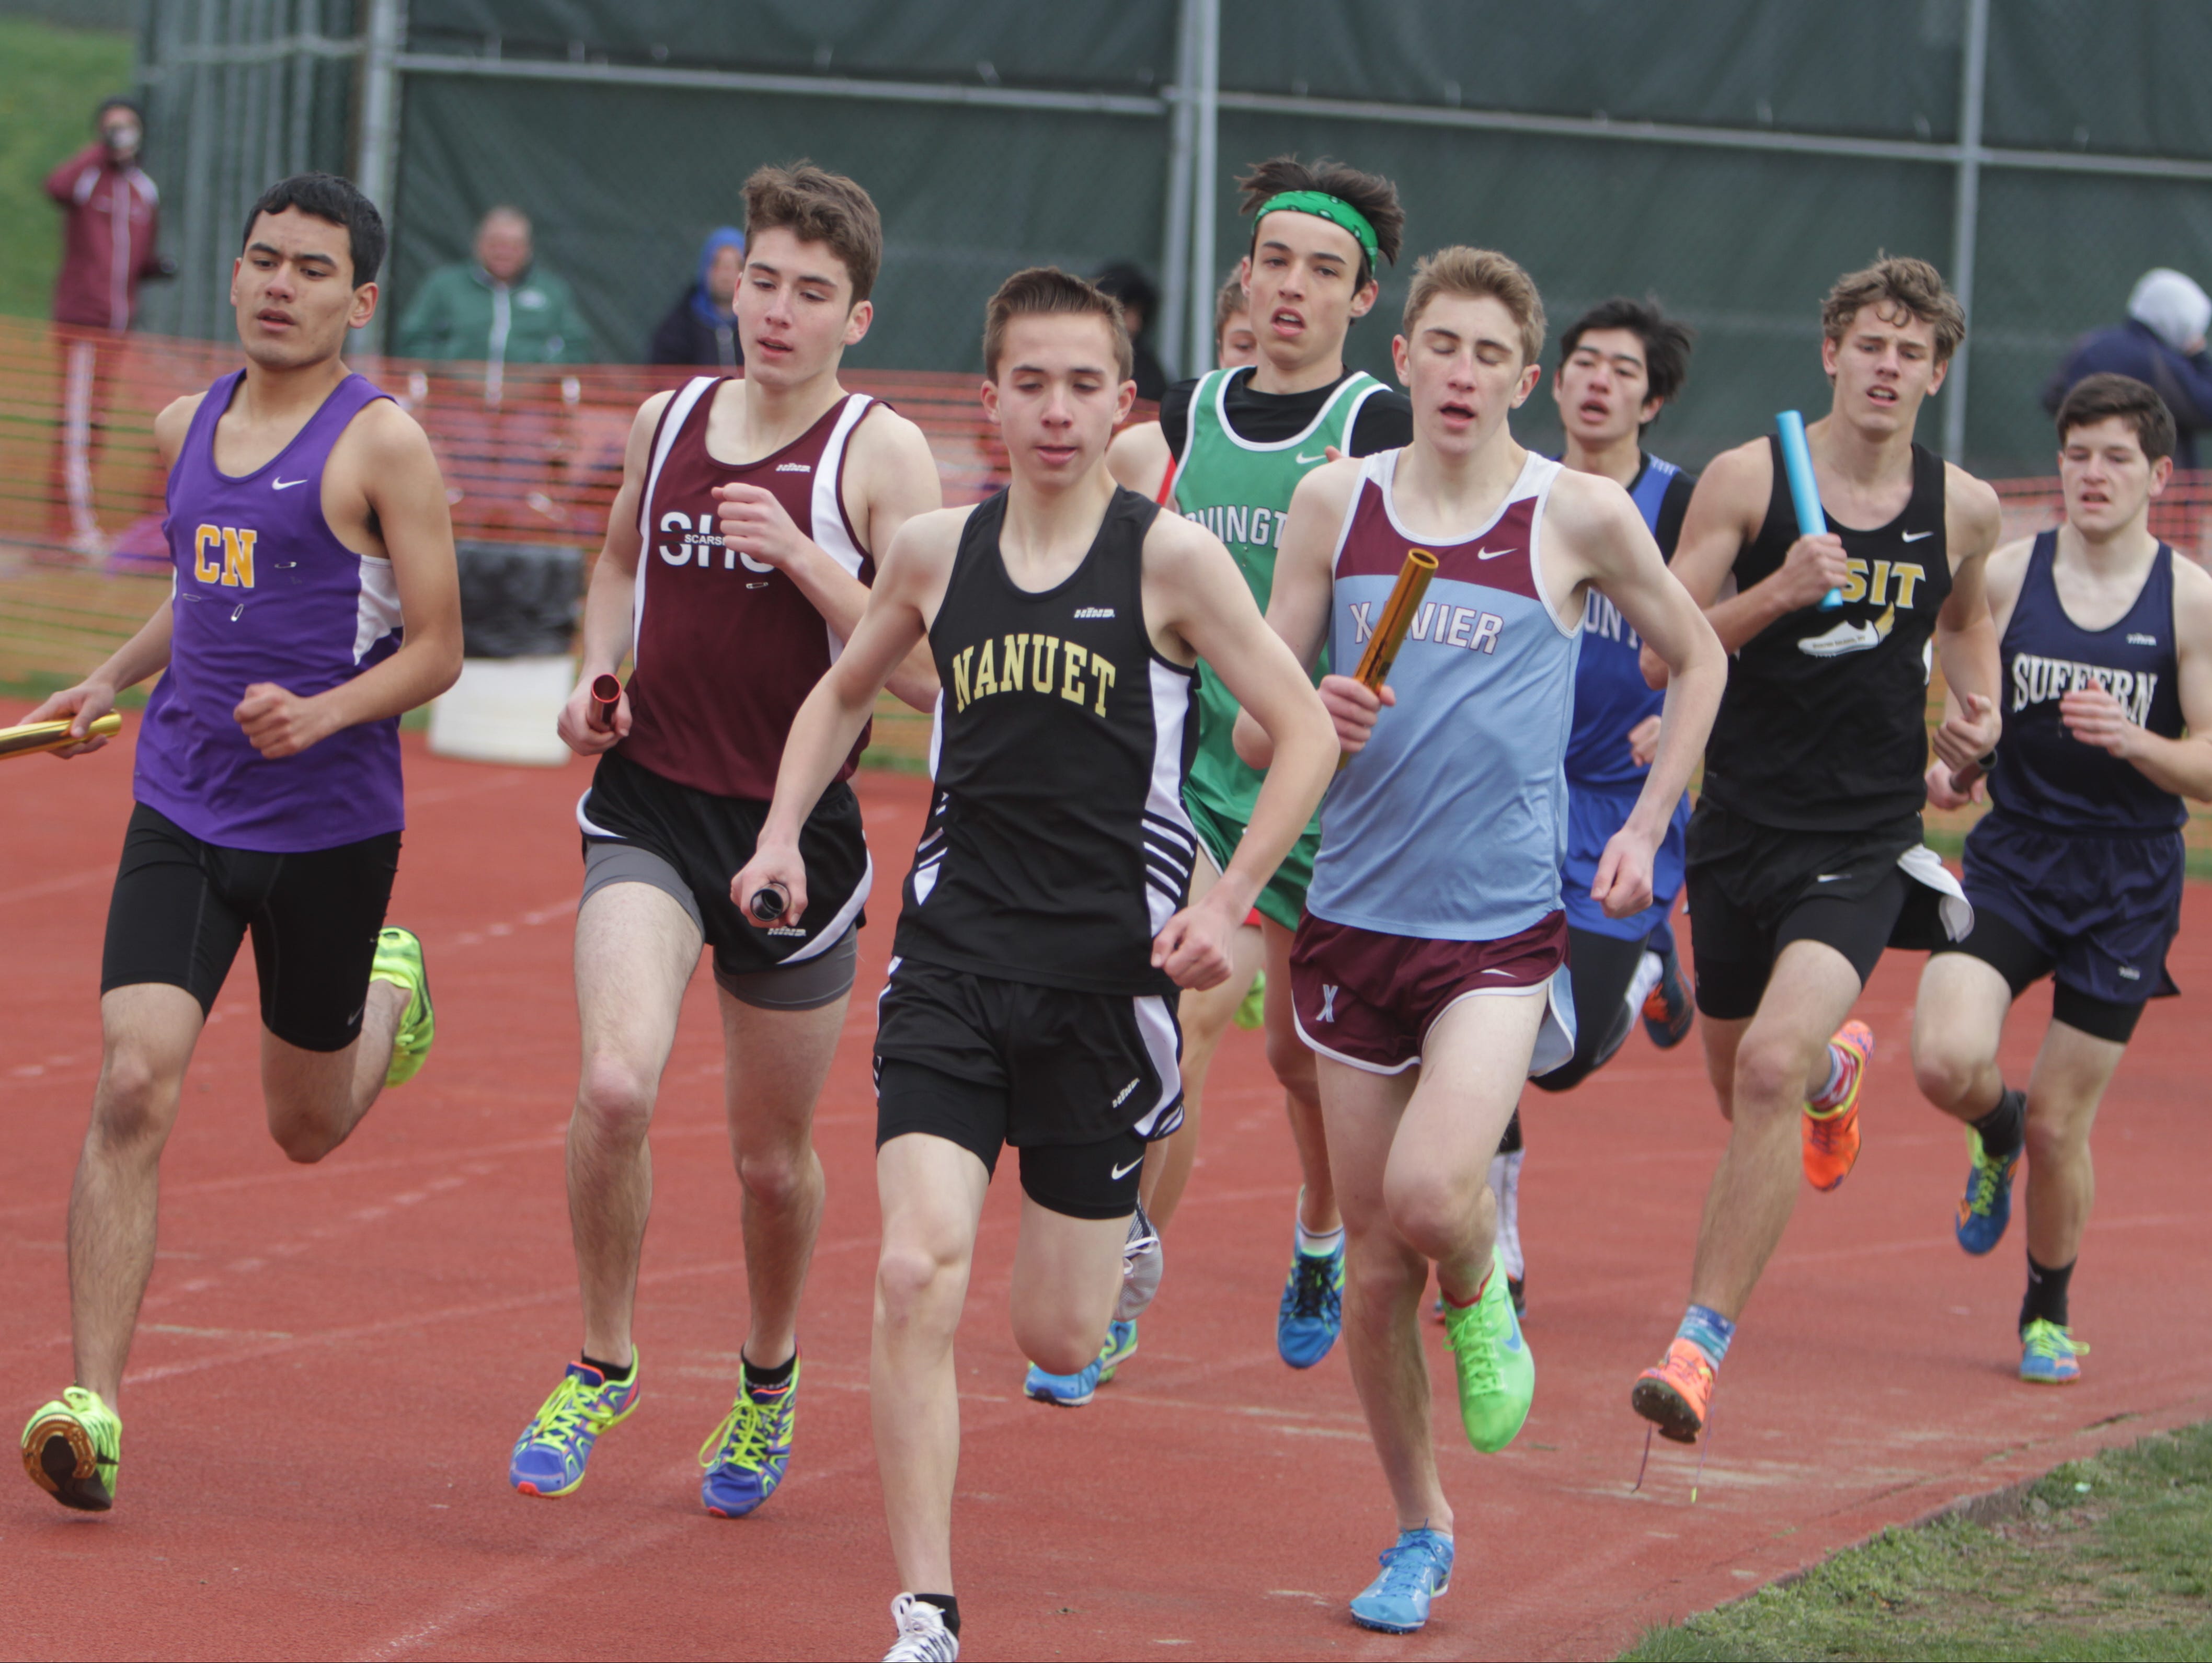 Action during the Nanuet Relays at Nanuet High School on Saturday, April 9th, 2016.